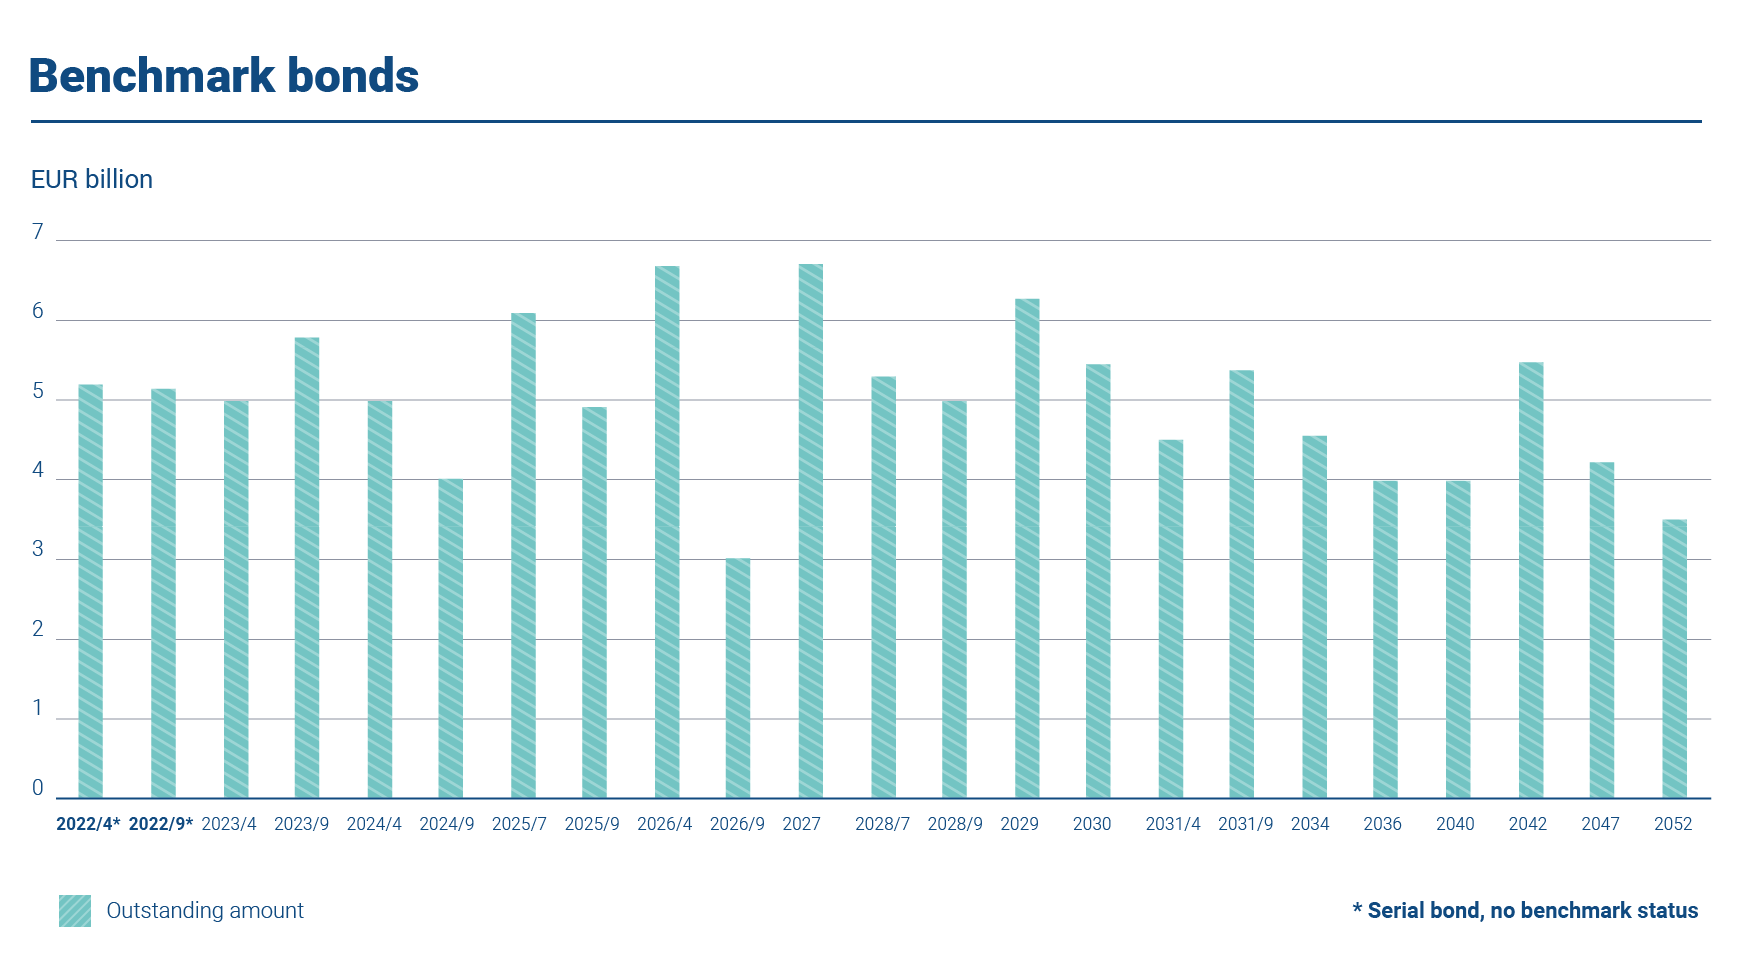 The graph shows all outstanding serial bonds issued by the State Treasury. Of these, the majority are benchmark bonds.